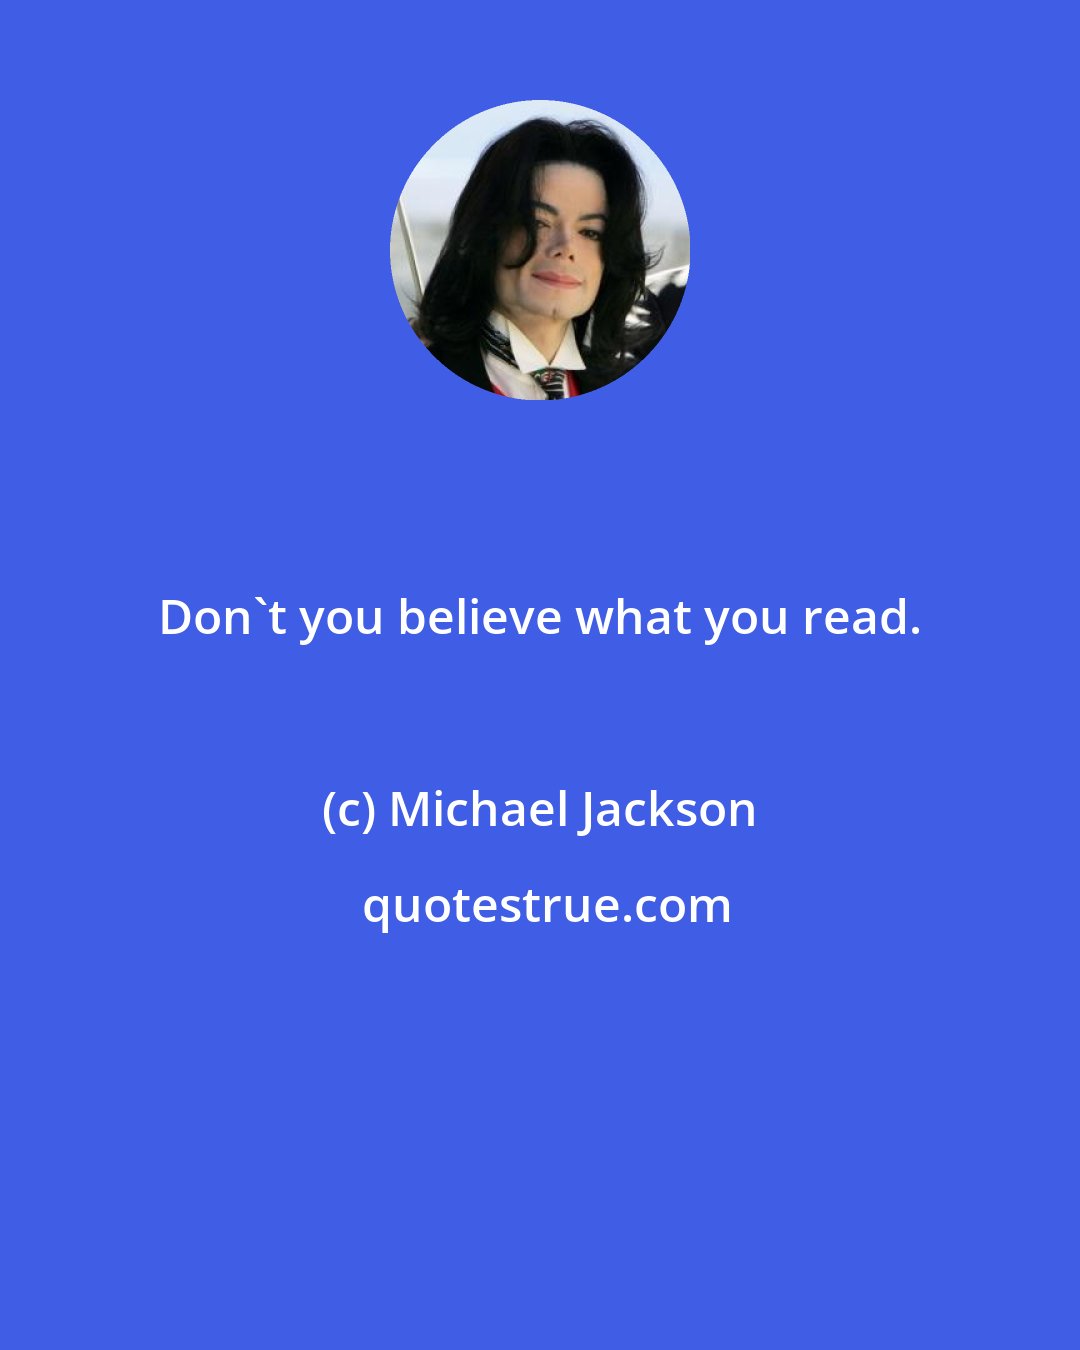 Michael Jackson: Don't you believe what you read.